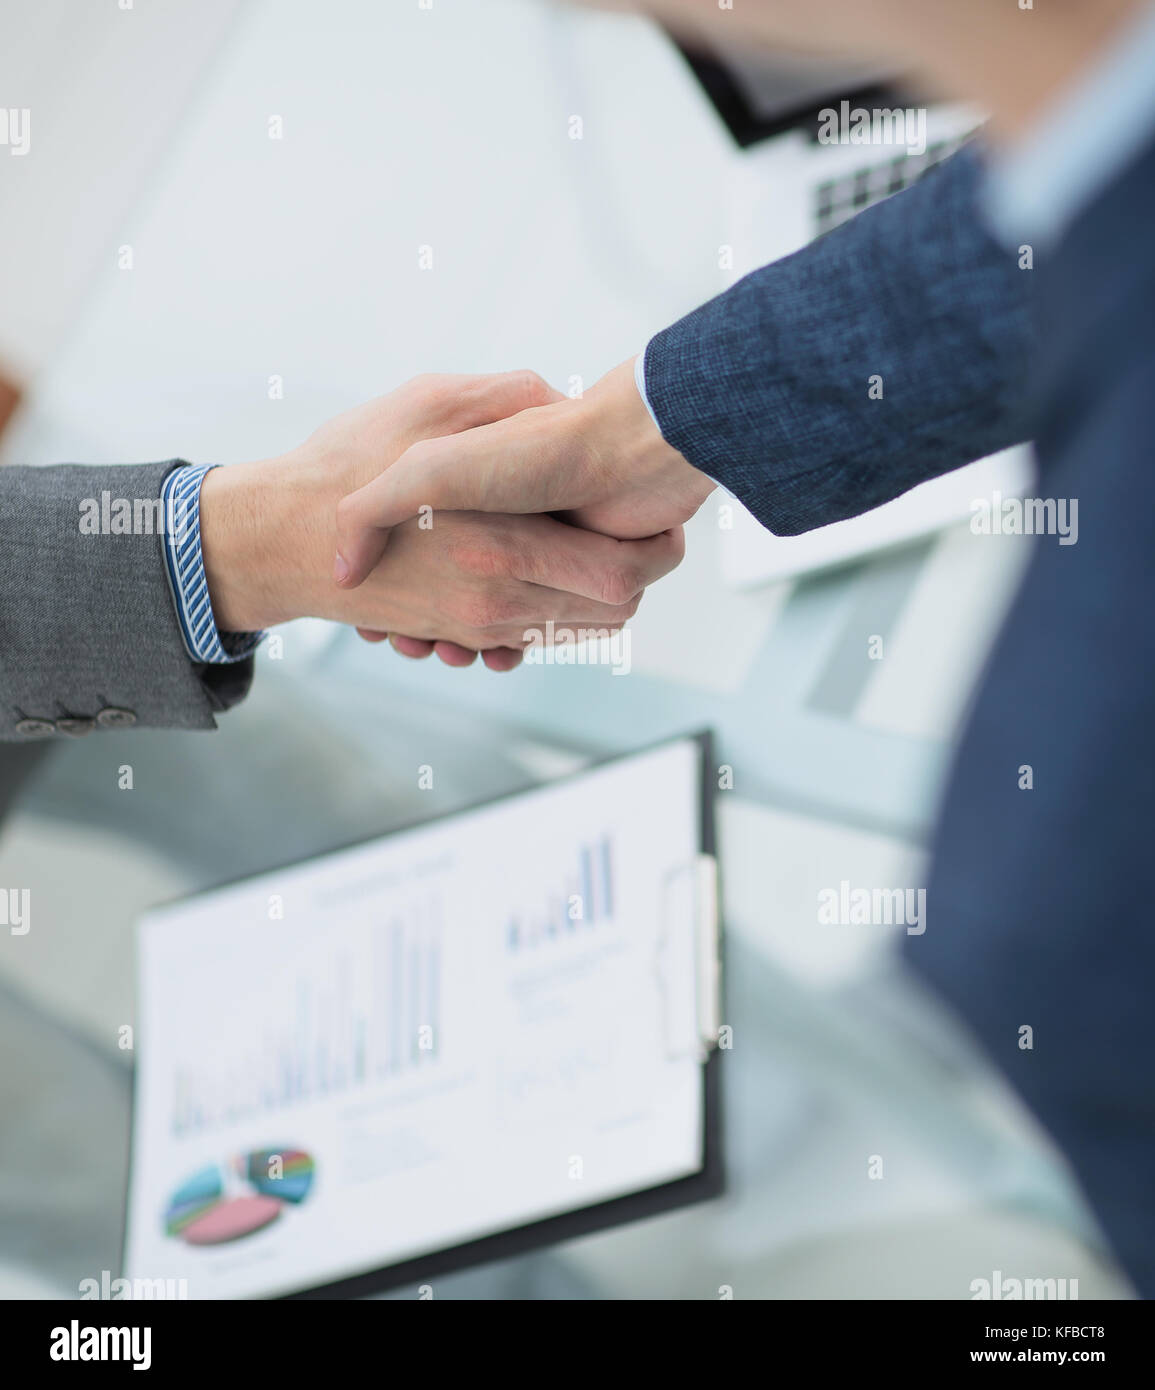 businessman shaking hands to seal a deal with his partner Stock Photo